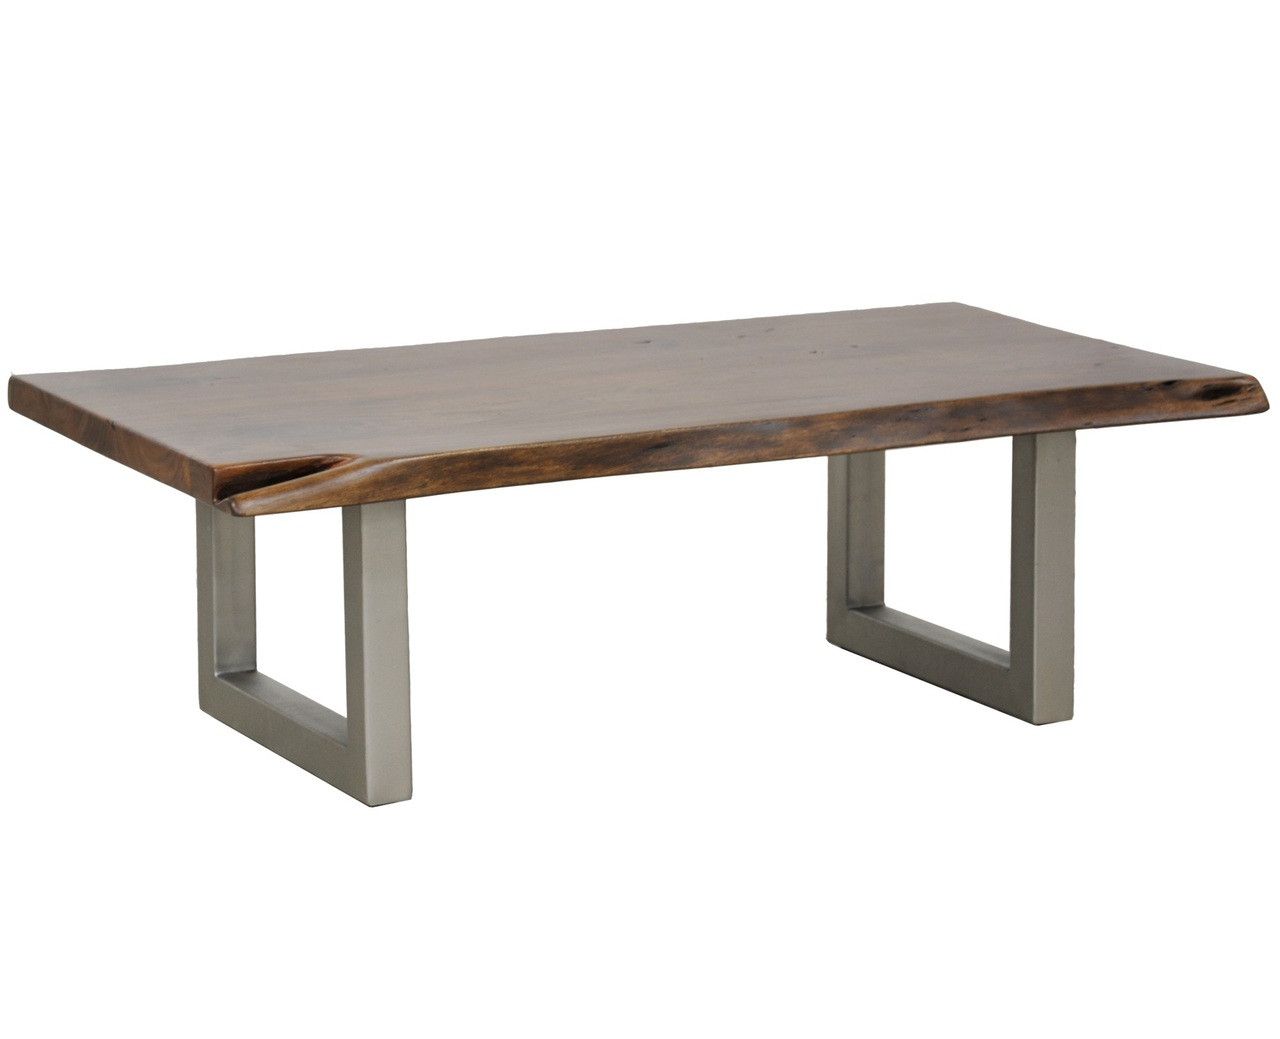 Montana Solid Wood Metal Leg Coffee Table | Zin Home With Coffee Tables With Solid Legs (View 7 of 15)